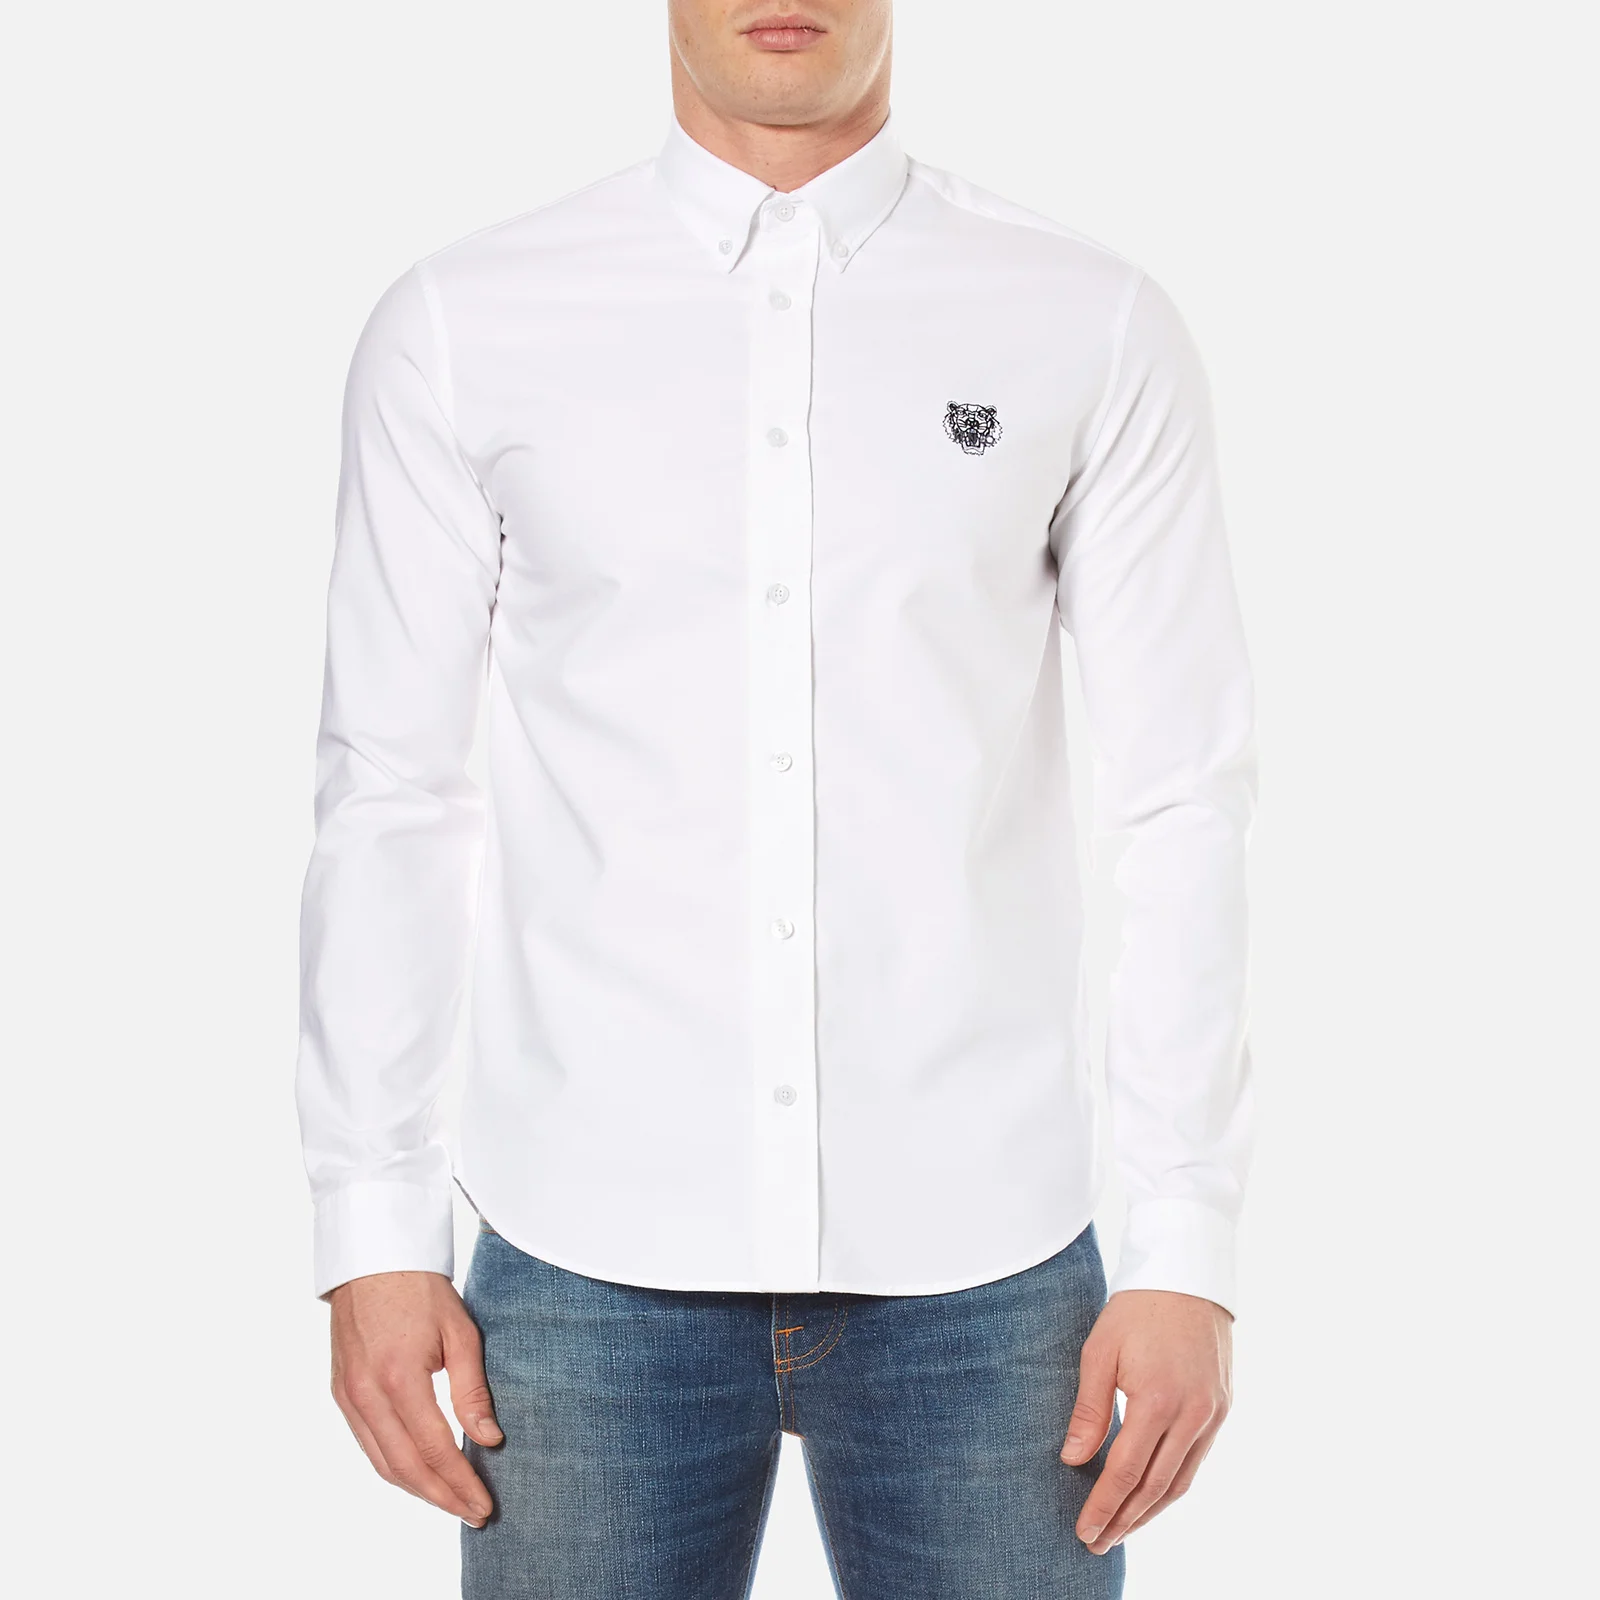 KENZO Men's Casual Fit Oxford Tiger Shirt - White Image 1